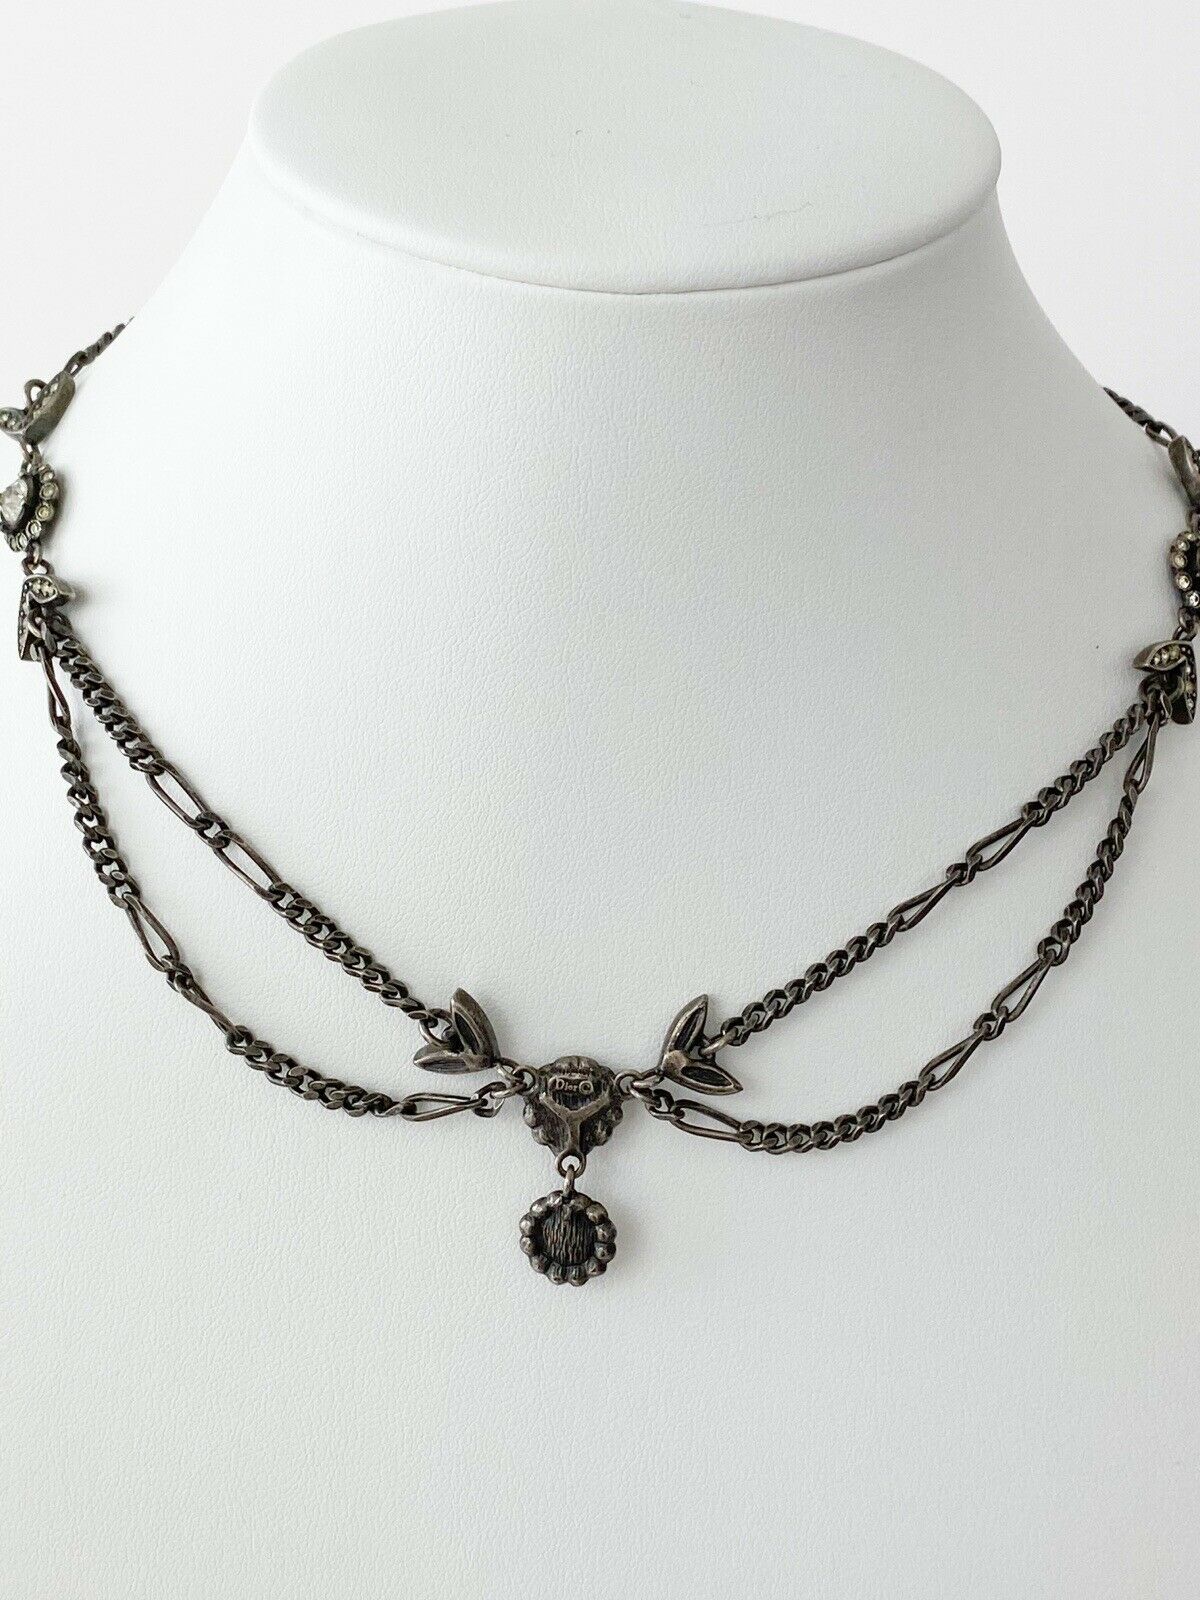 【SOLD OUT】Christian Dior Vintage Necklace Black Tone Flower Rhinestone